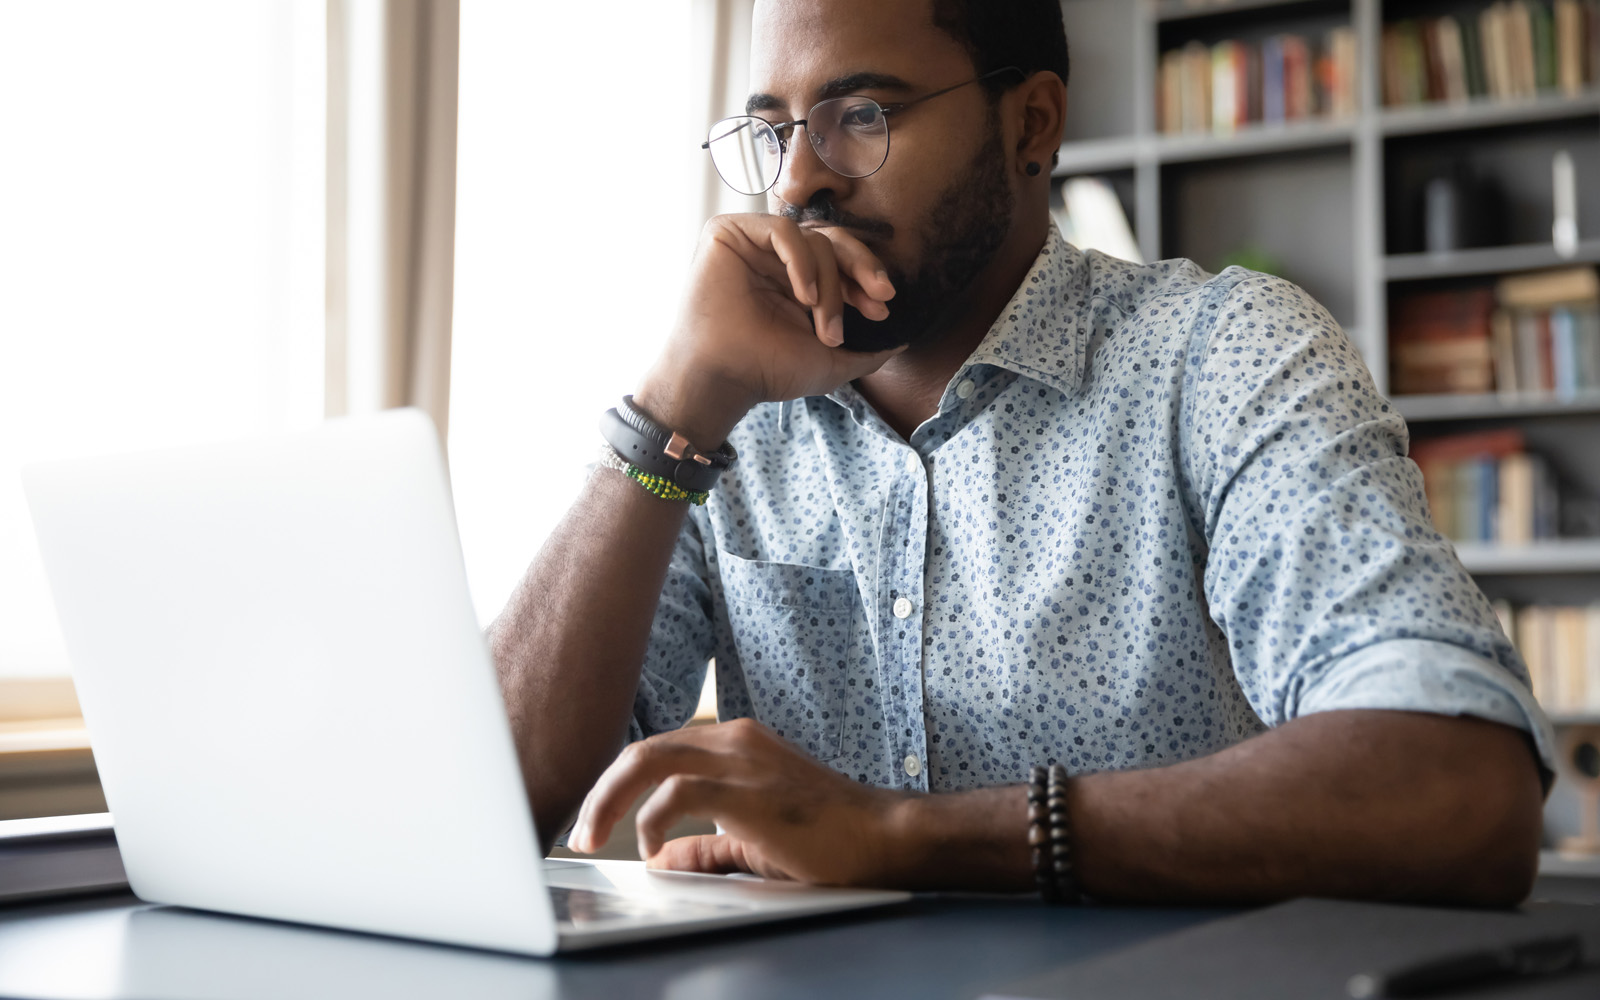 Man with beard and wire-rimmed glasses sits at laptop, thinking.